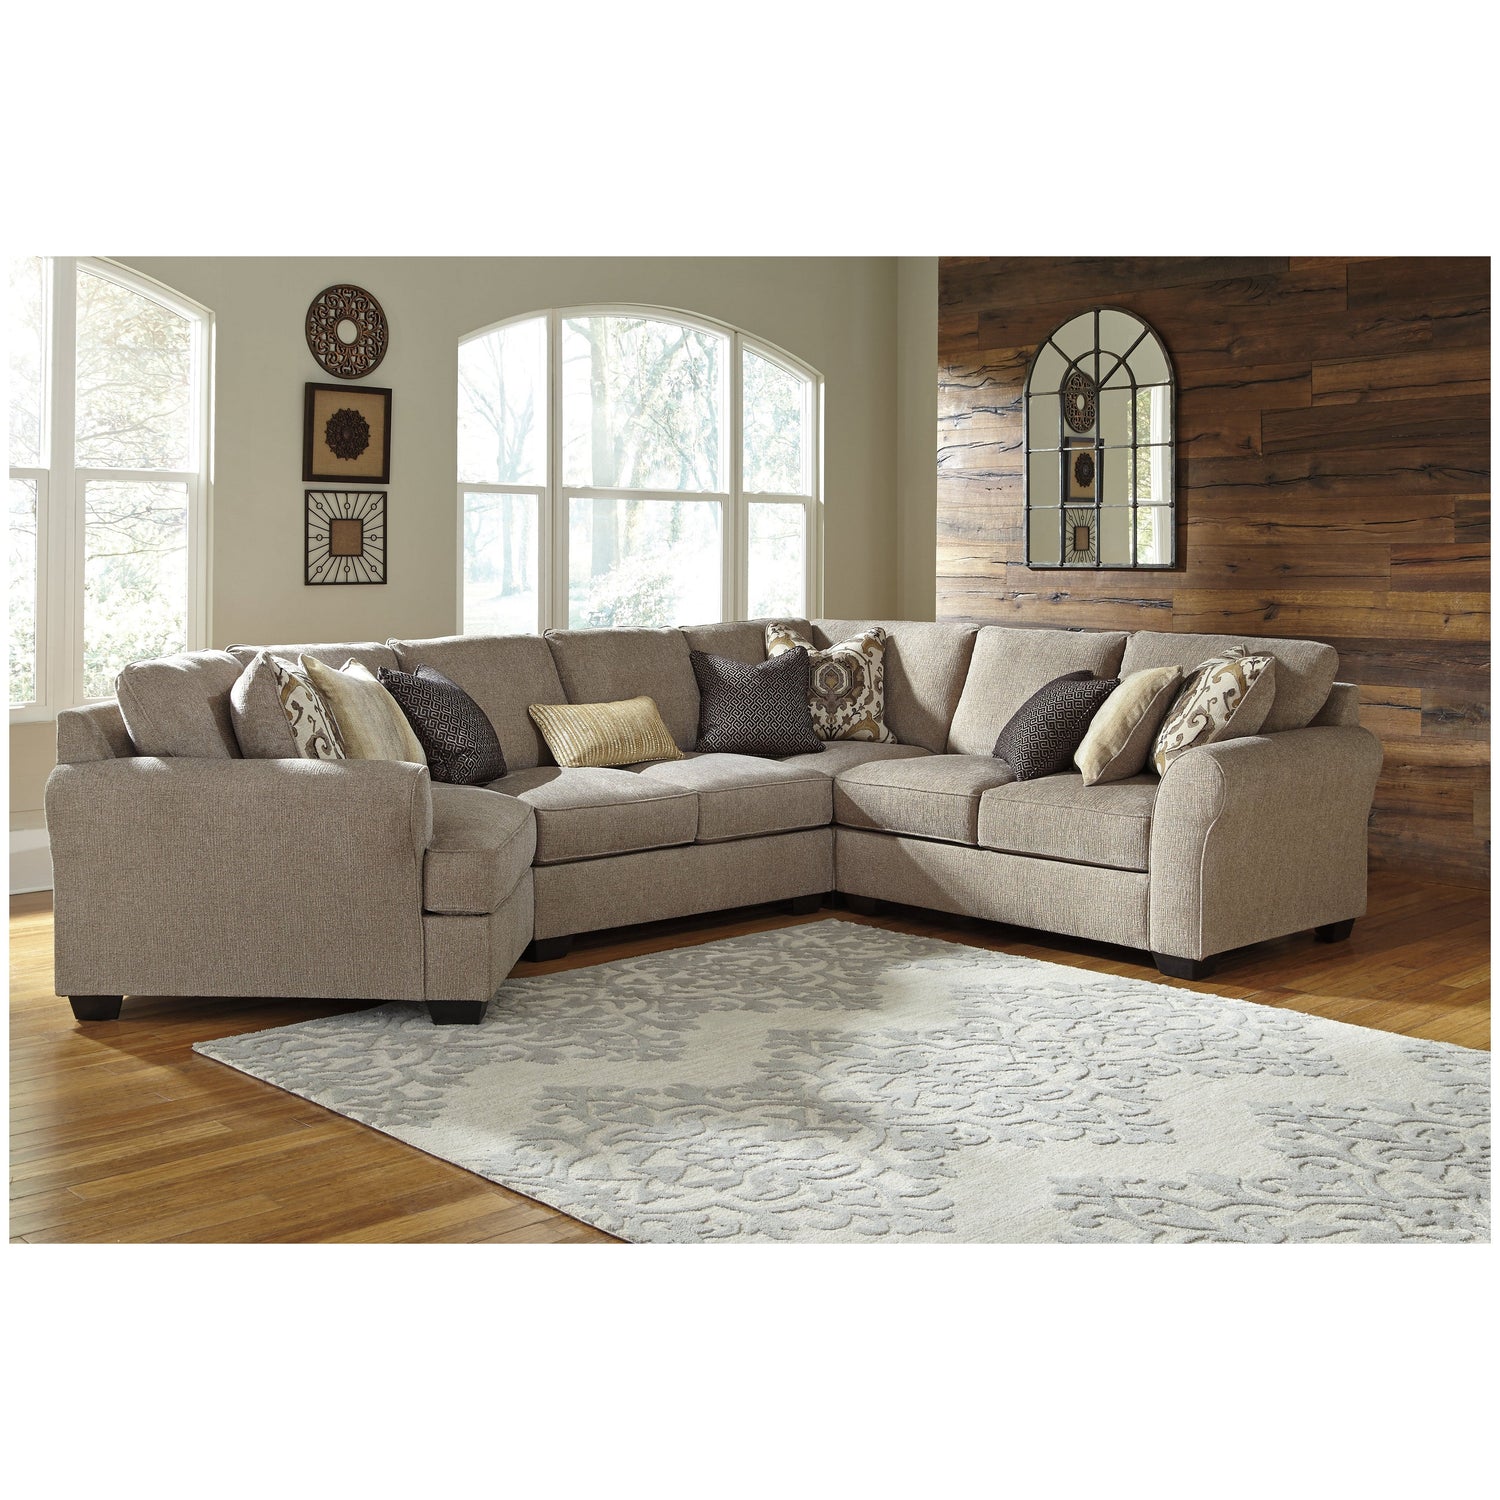 Pantomine 4-Piece Sectional with Cuddler Ash-39122S11